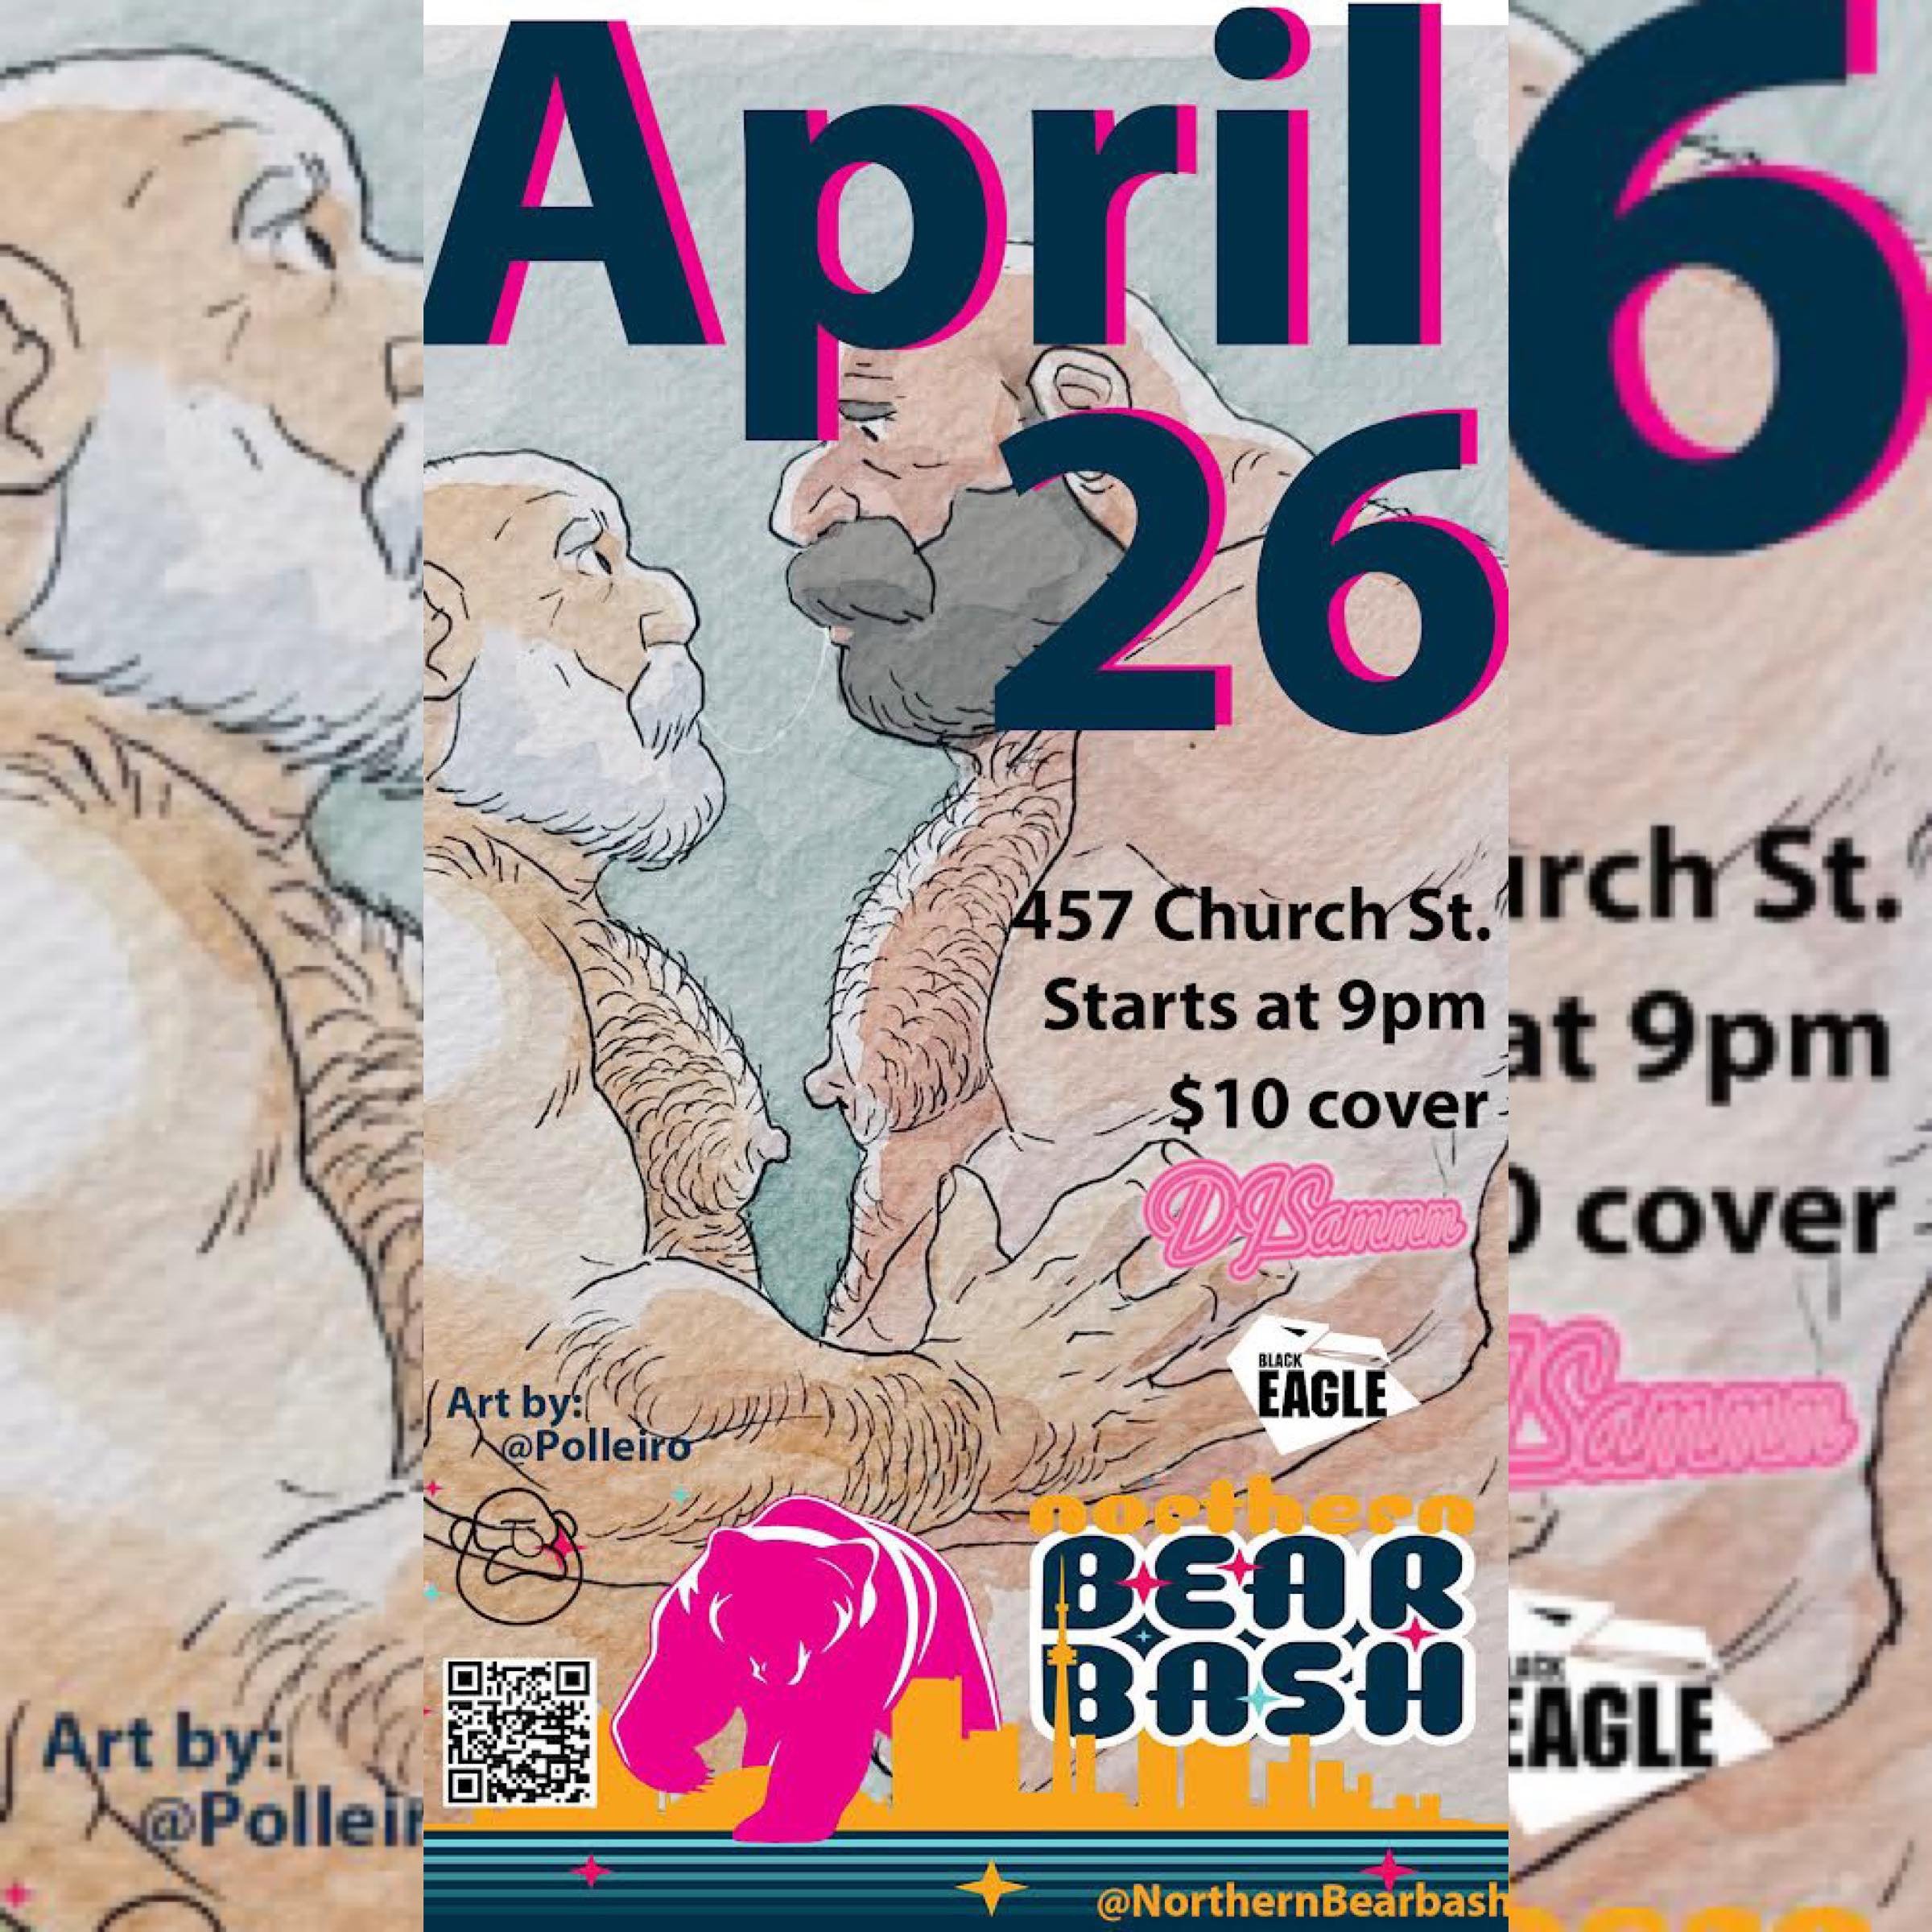 TONIGHT! Where are the bears at? At @northernbearbash of course! Come socialize or dance to the music provided by @djsammmto ! Party starts at 9PM.